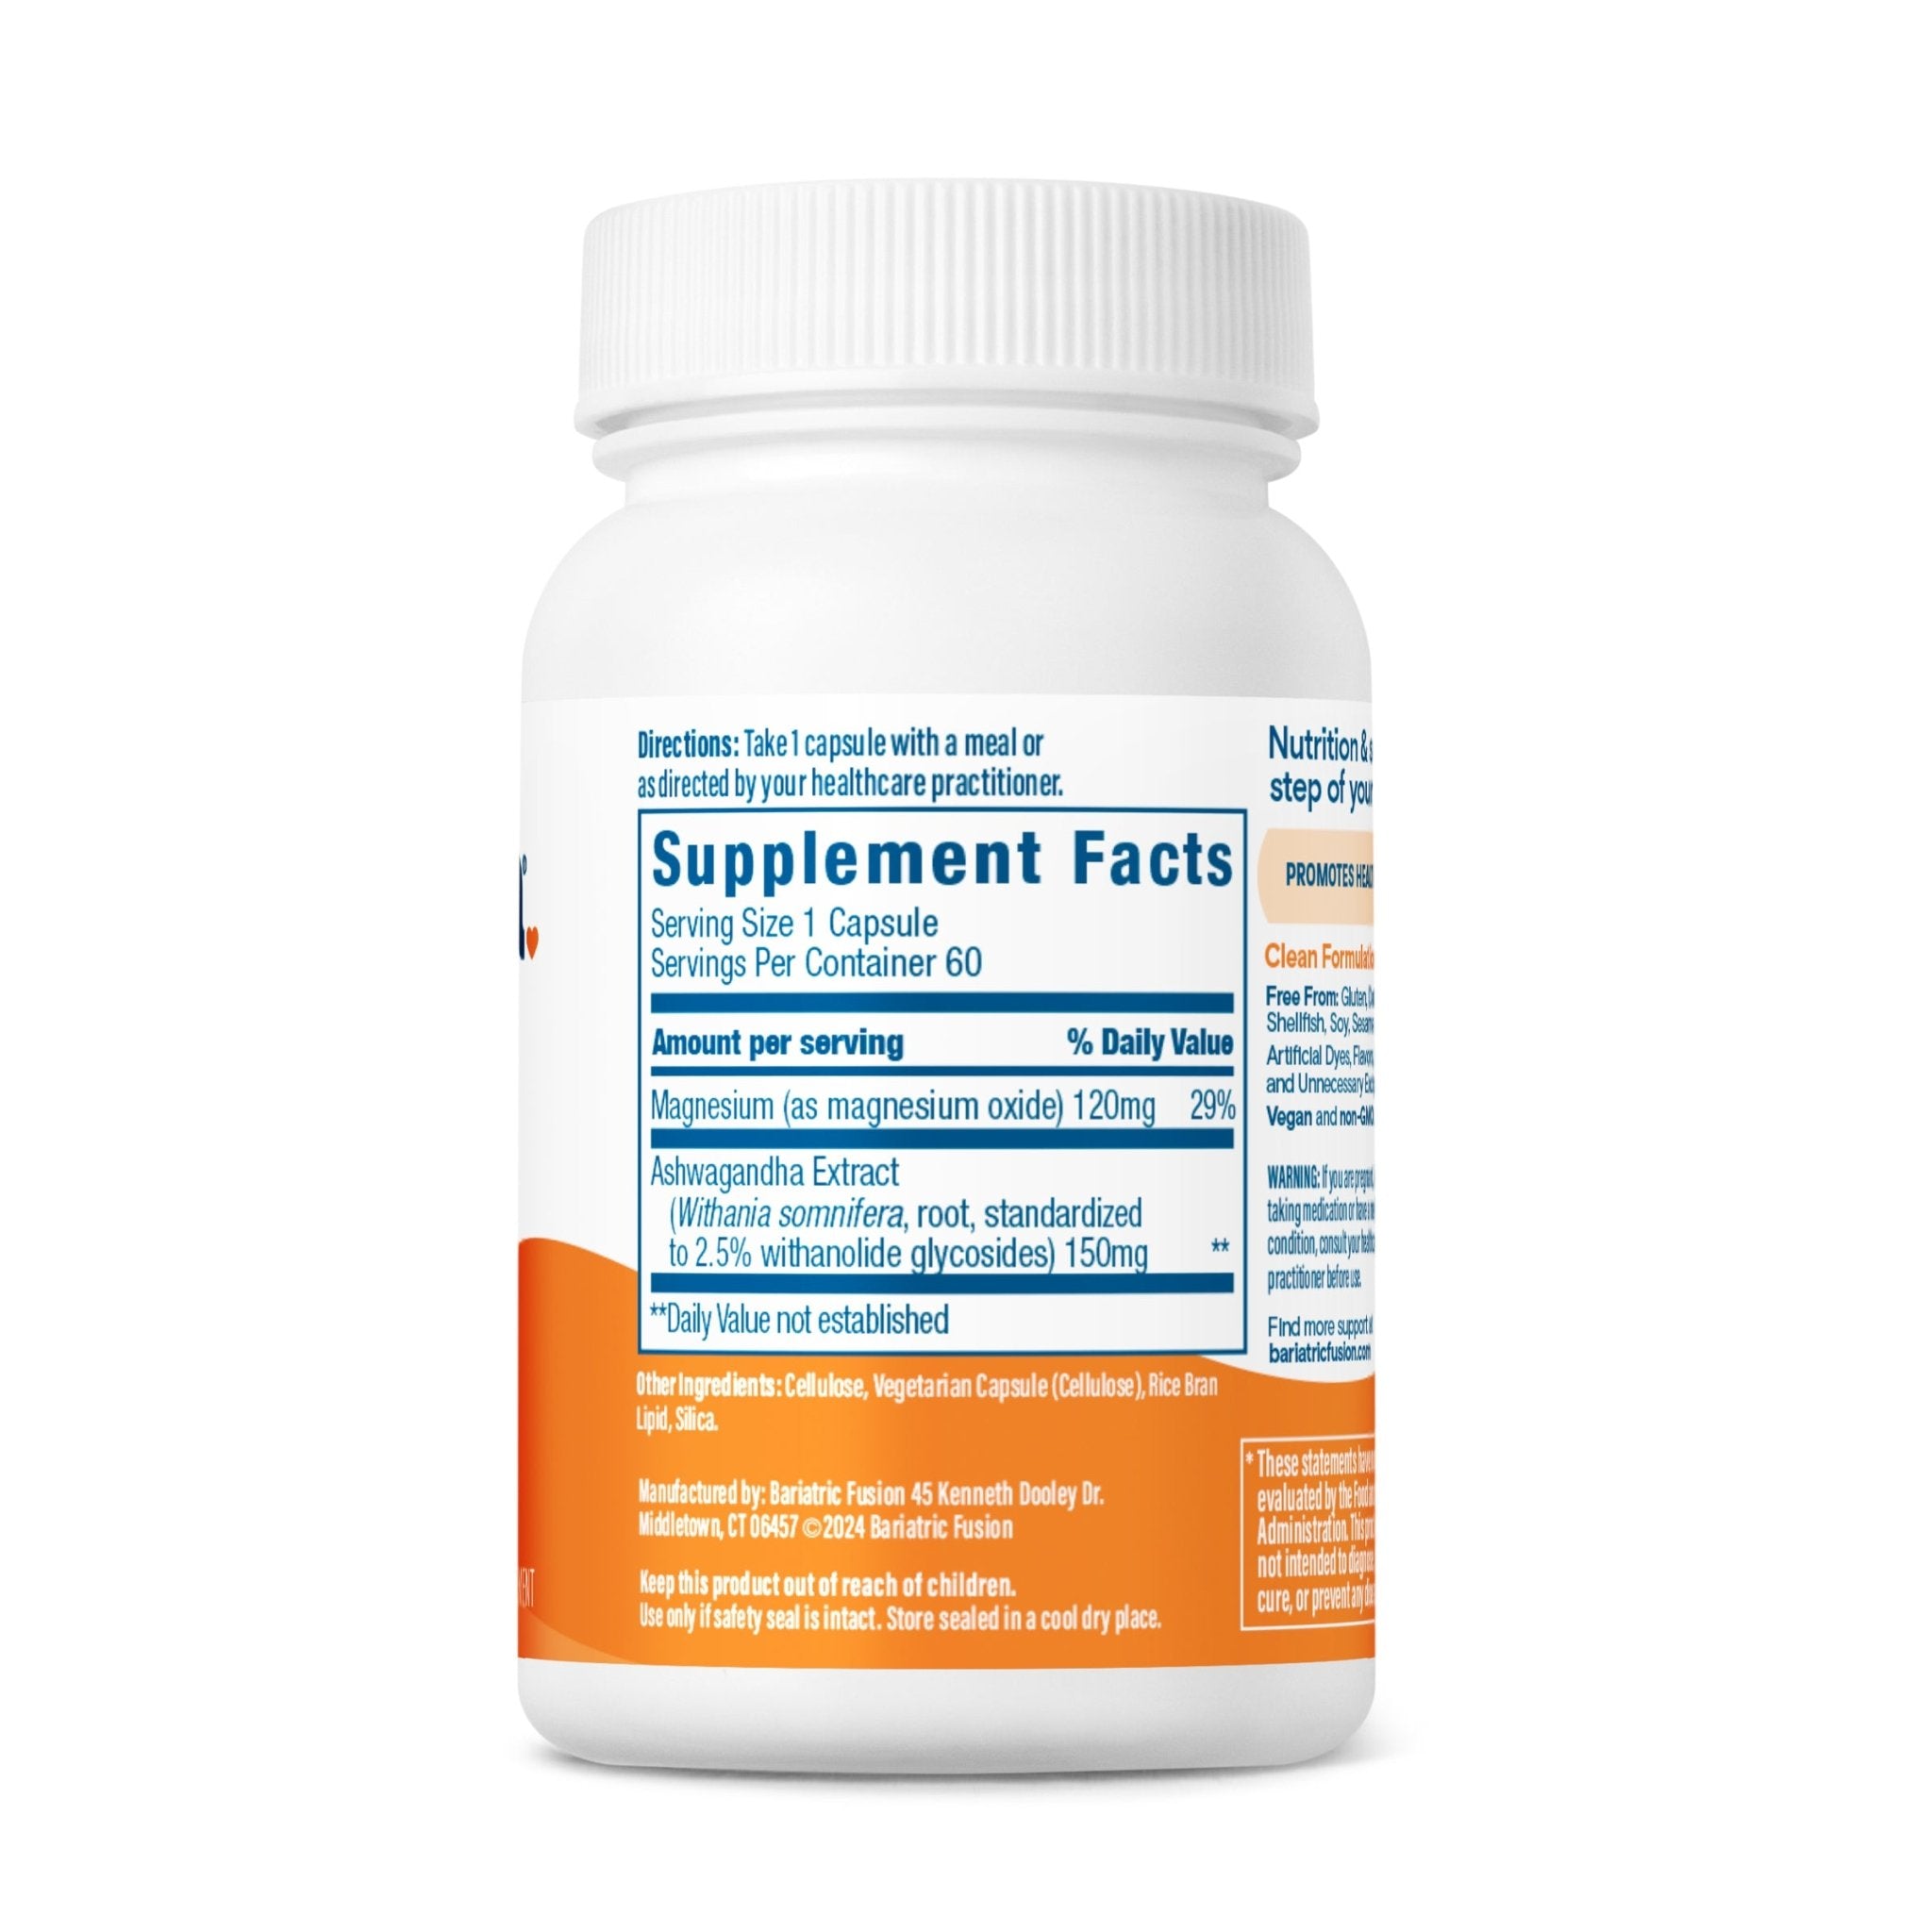 Bariatric Fusion Stress Support directions, servings, and ingredients.